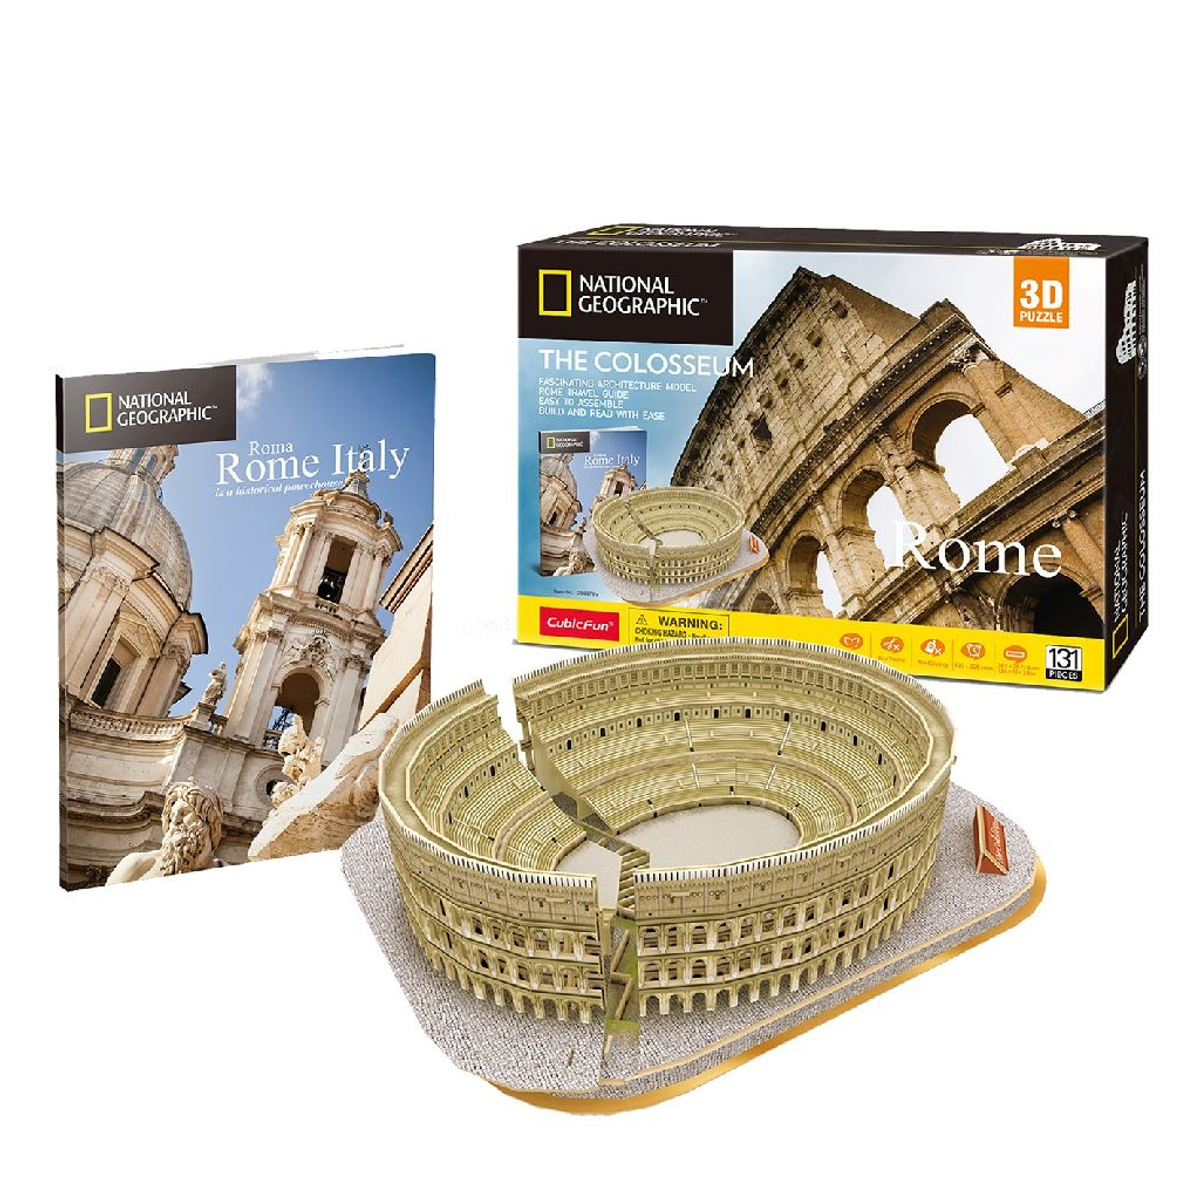 Puzzle The Colosseum GEOGRAPHIC NATIONAL